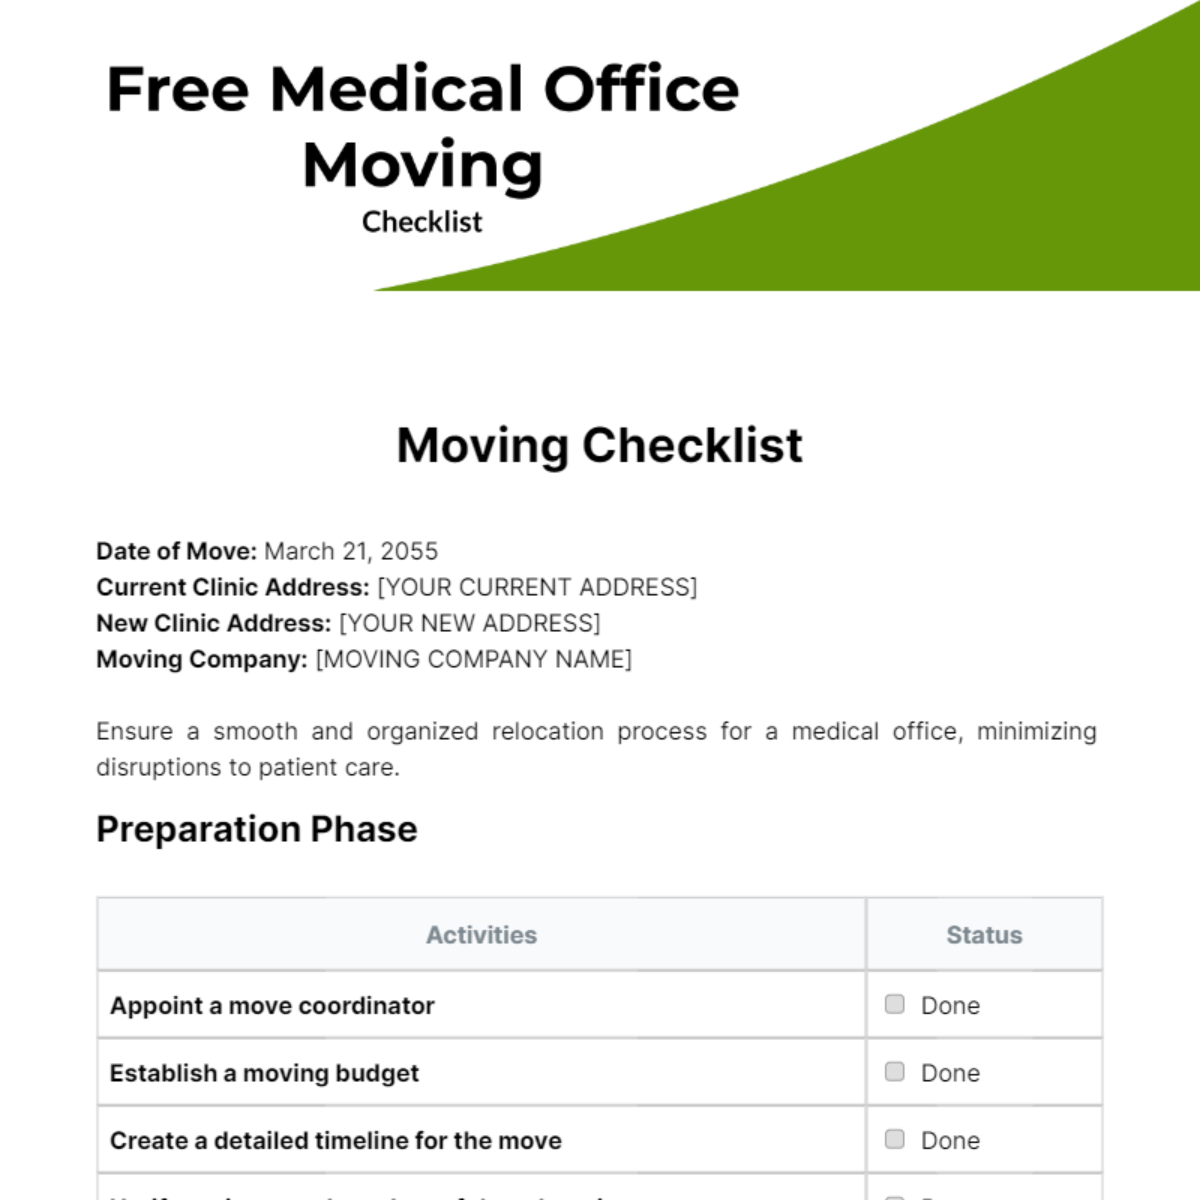 Free Medical Office Moving Checklist Template